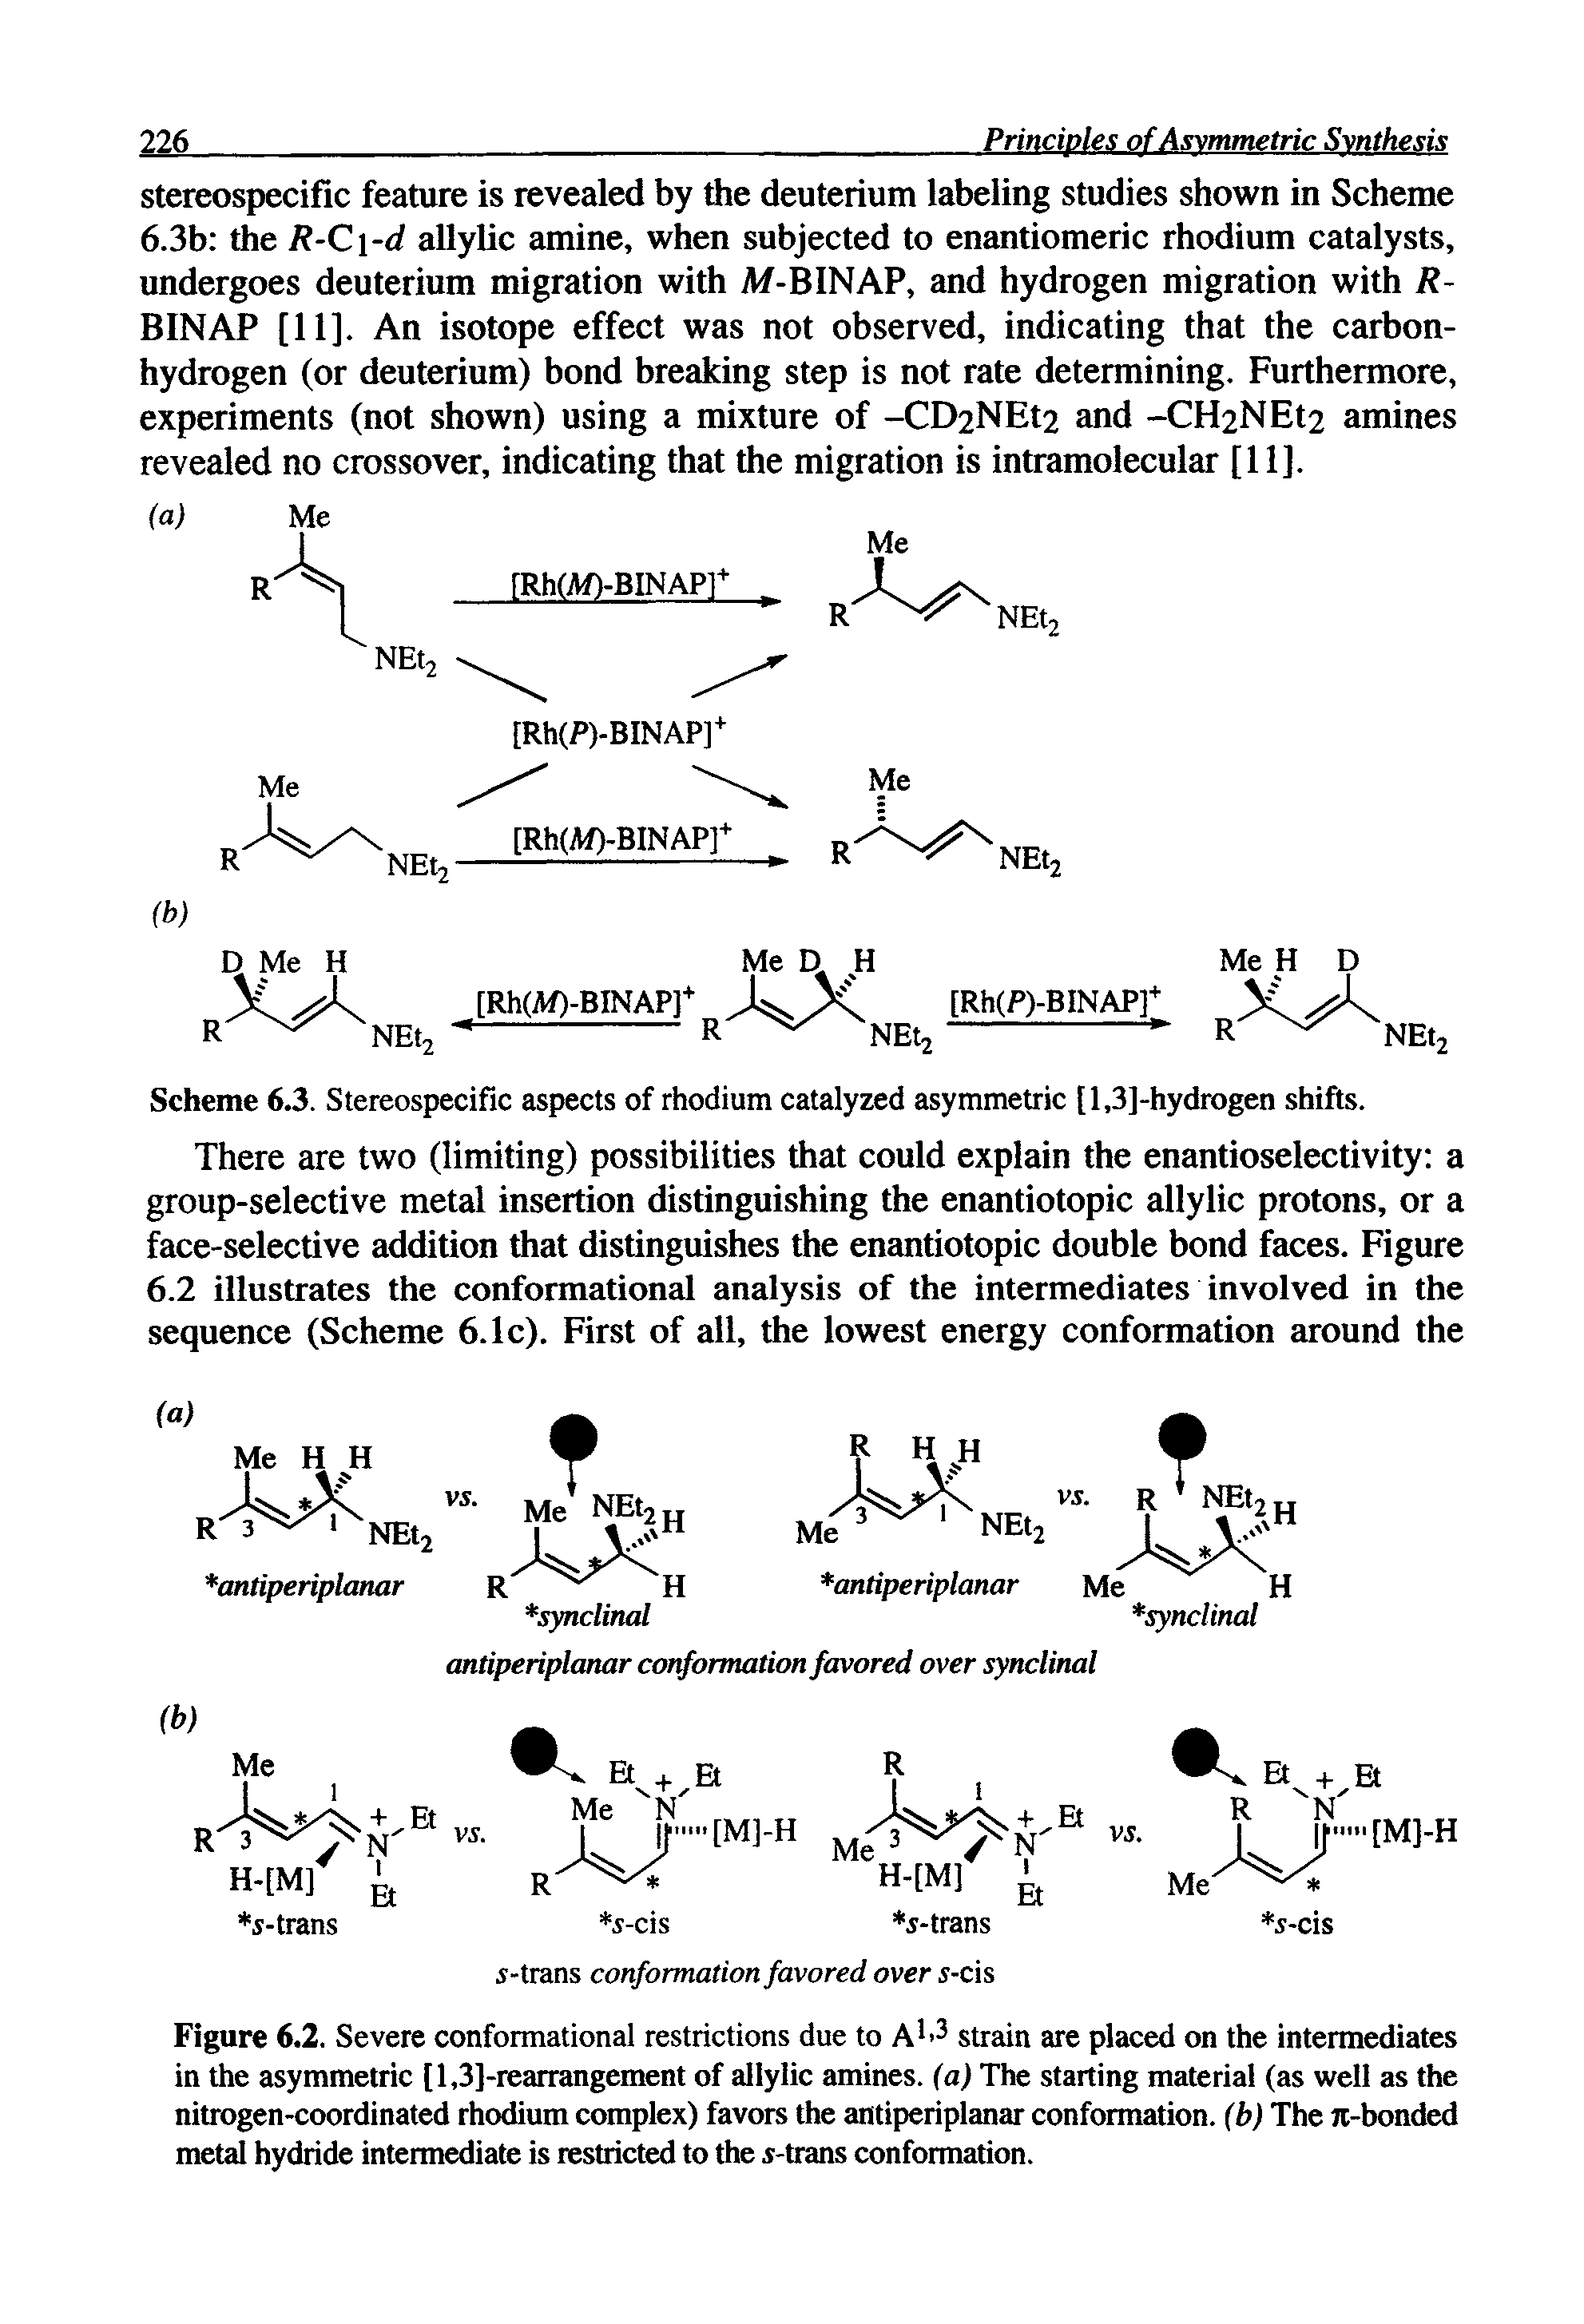 Figure 6.2. Severe conformational restrictions due to A1-3 strain are placed on the intermediates in the asymmetric [l,3]-rearrangement of allylic amines, (a) The starting material (as well as the nitrogen-coordinated rhodium complex) favors the antiperiplanar conformation, (b) The Ji-bonded metal hydride intermediate is restricted to the 5-trans conformation.